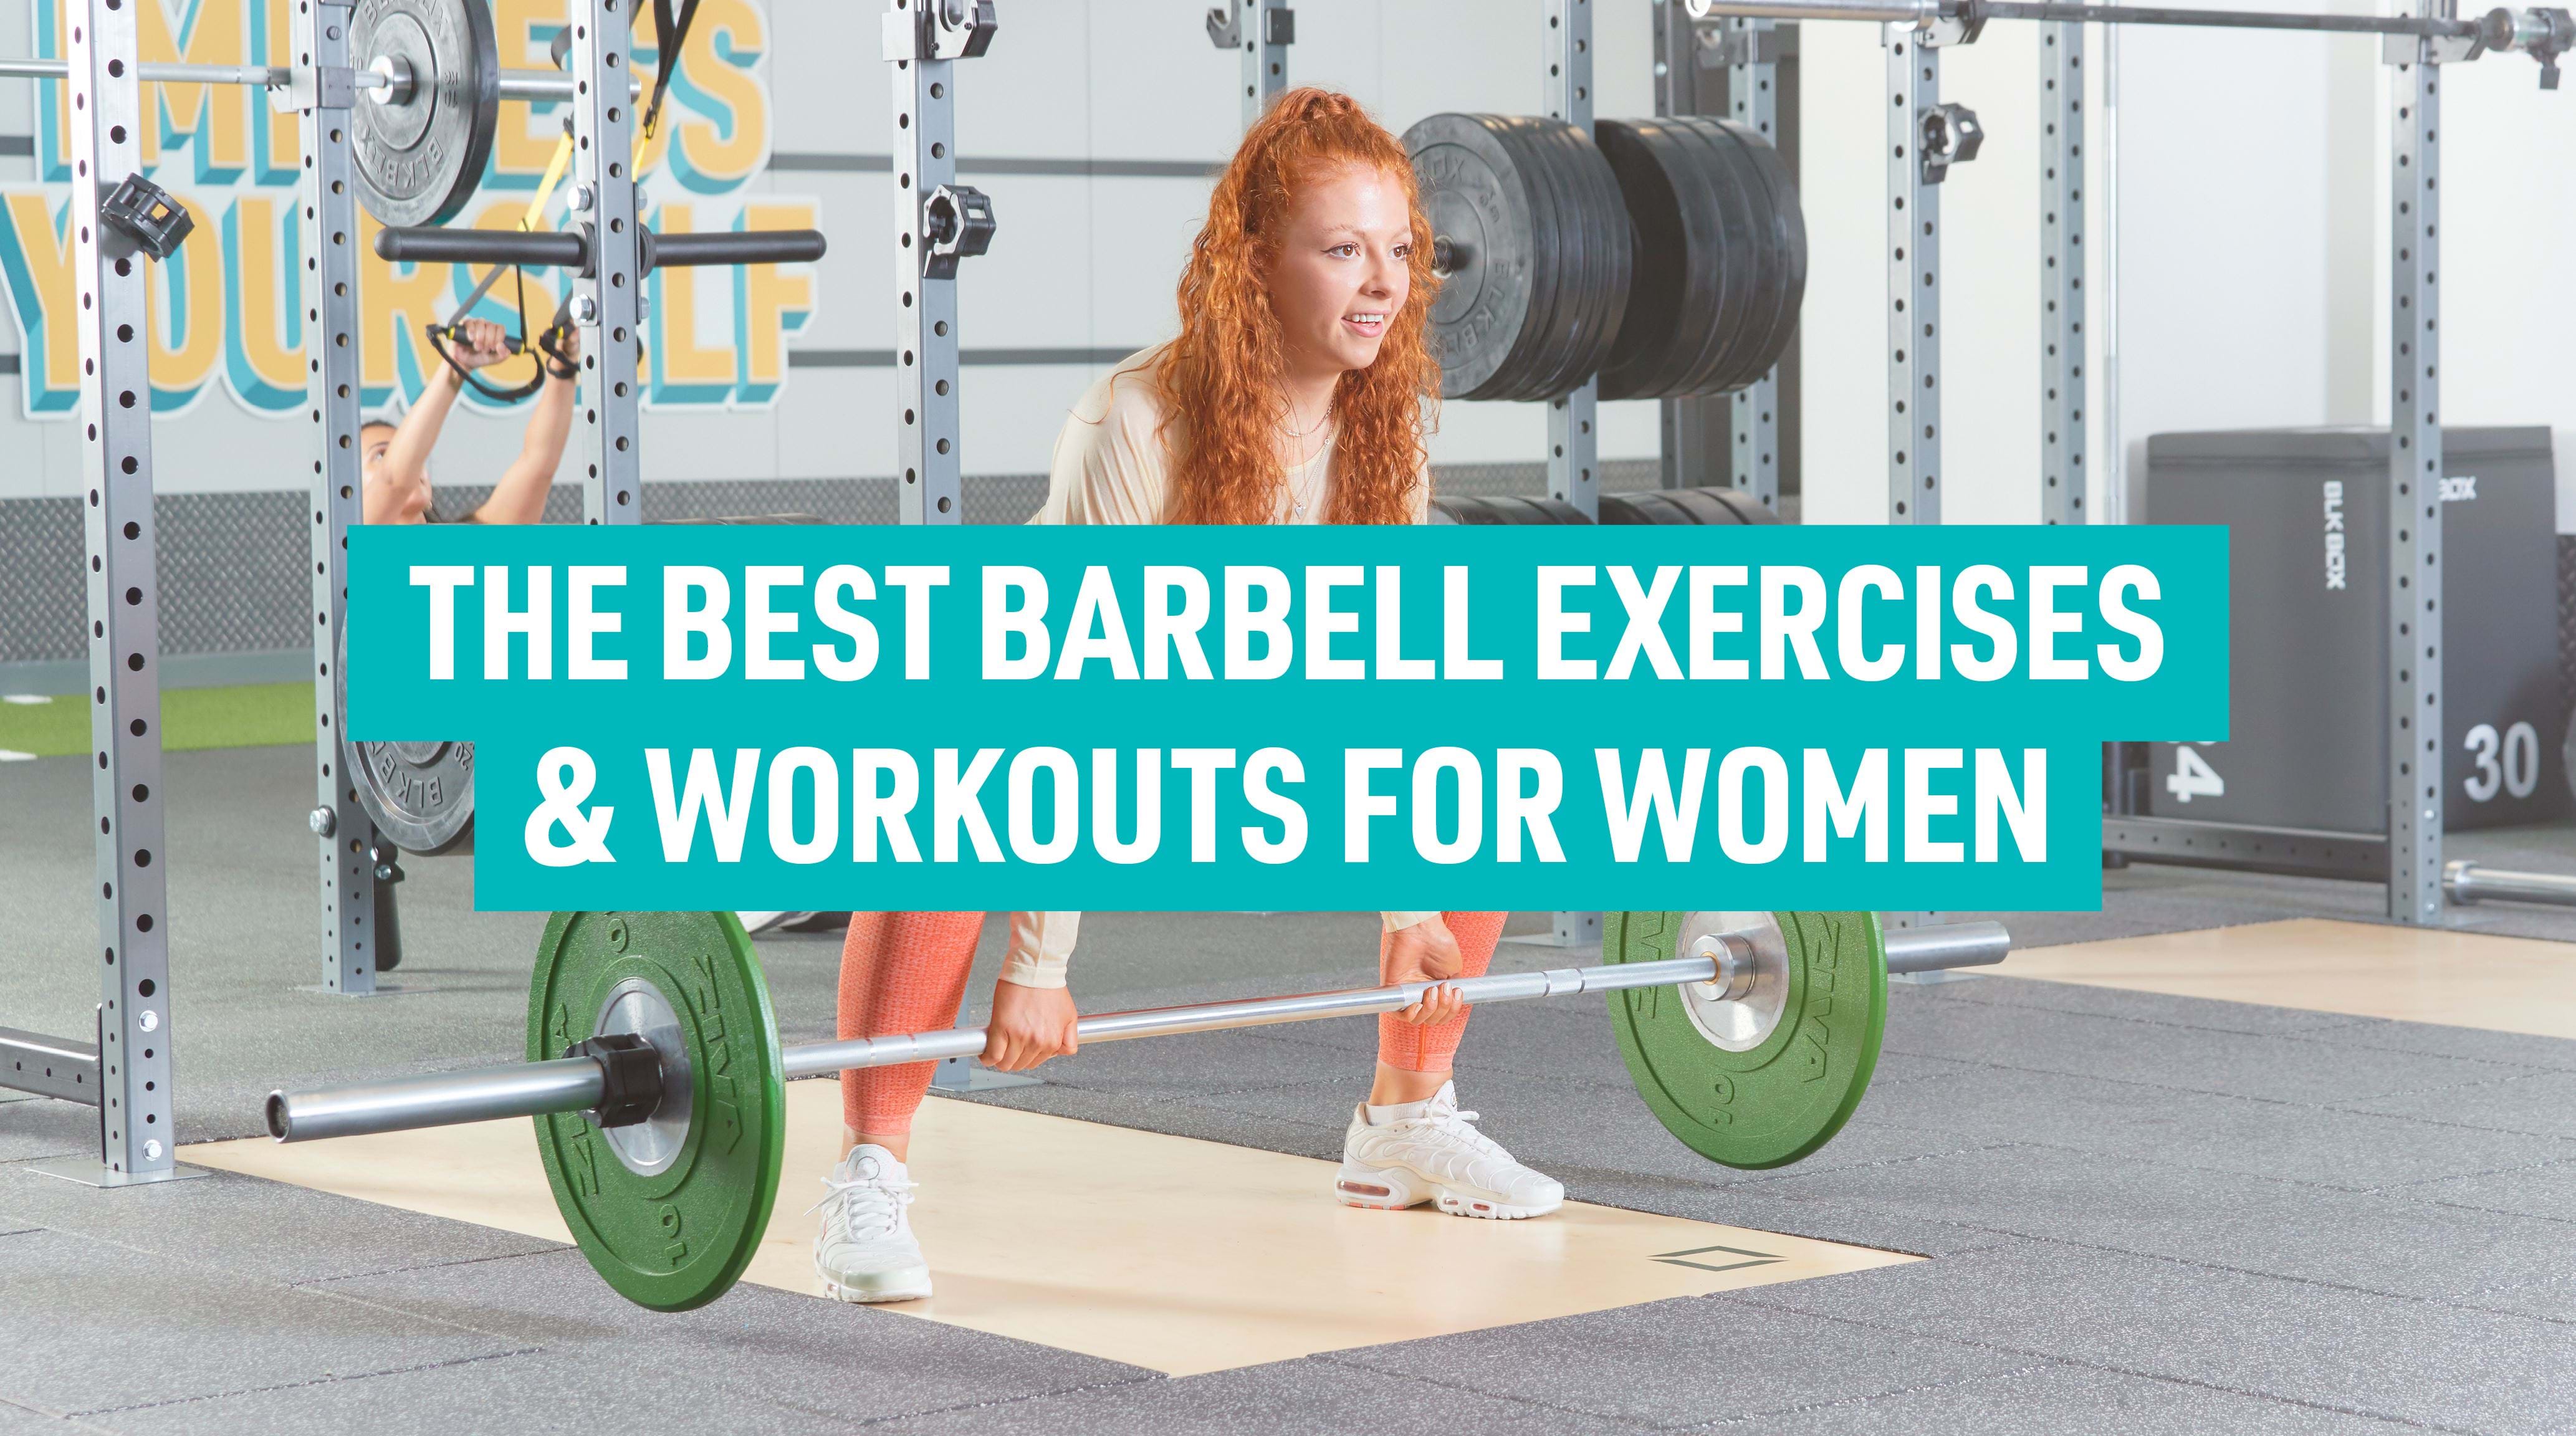 4 empty barbell exercises for building strength and stability